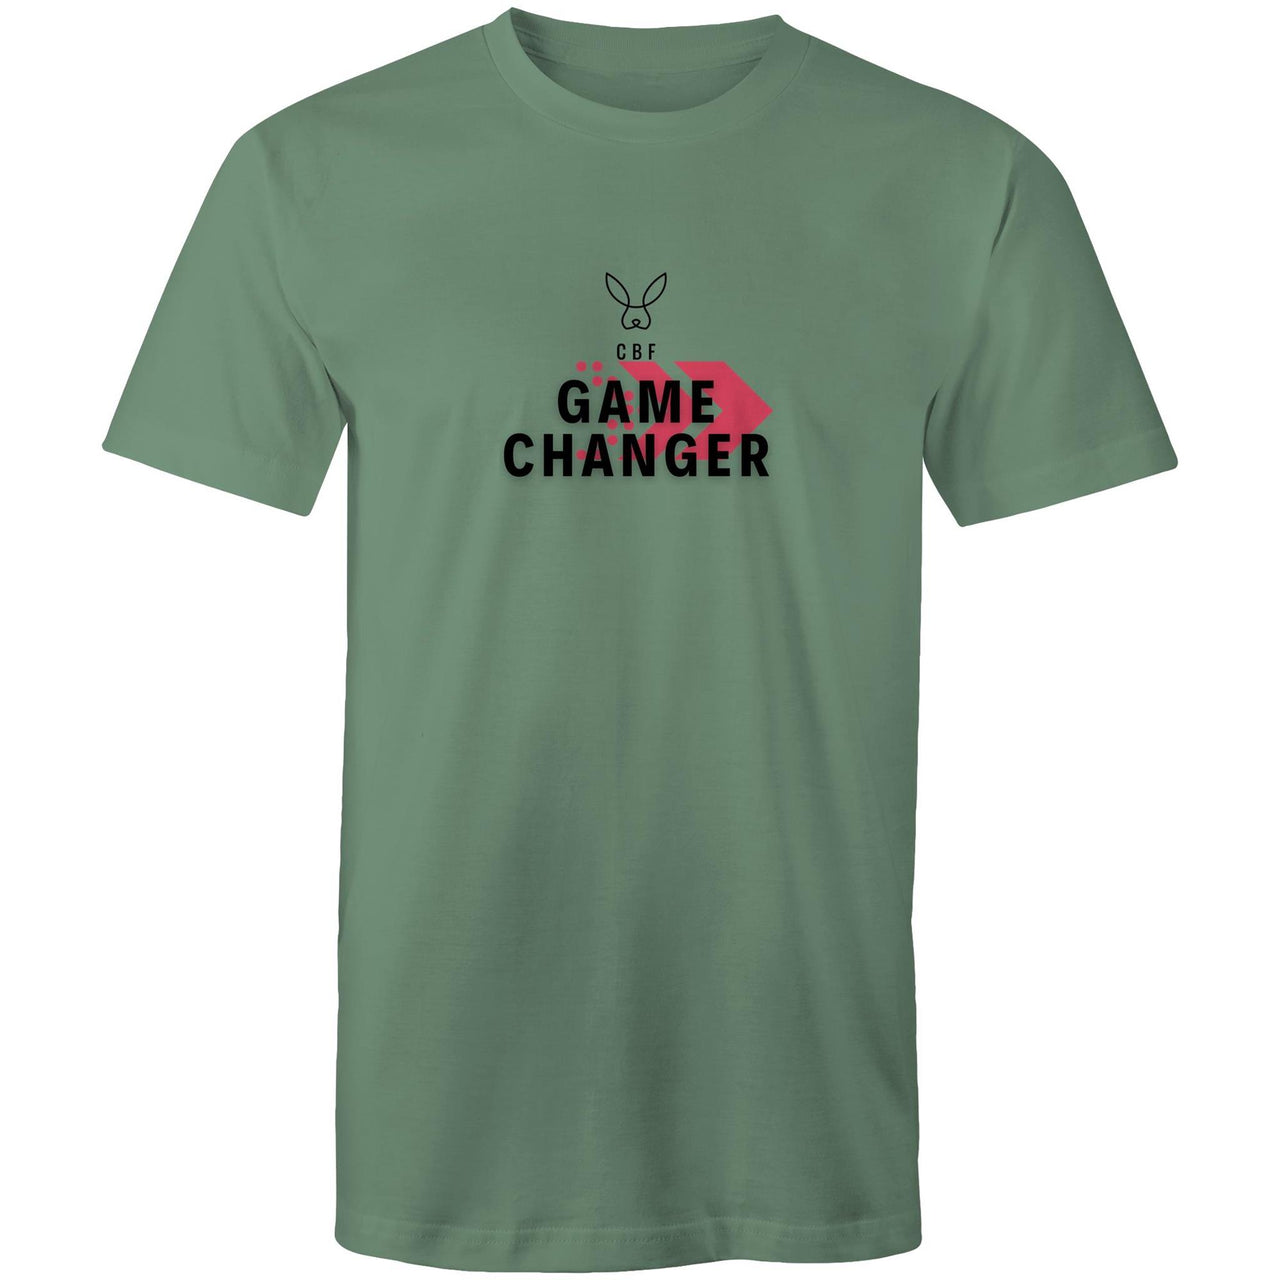 CBF Game Changer Unisex Mens Womens Crew T-Shirt forest by CBF Clothing